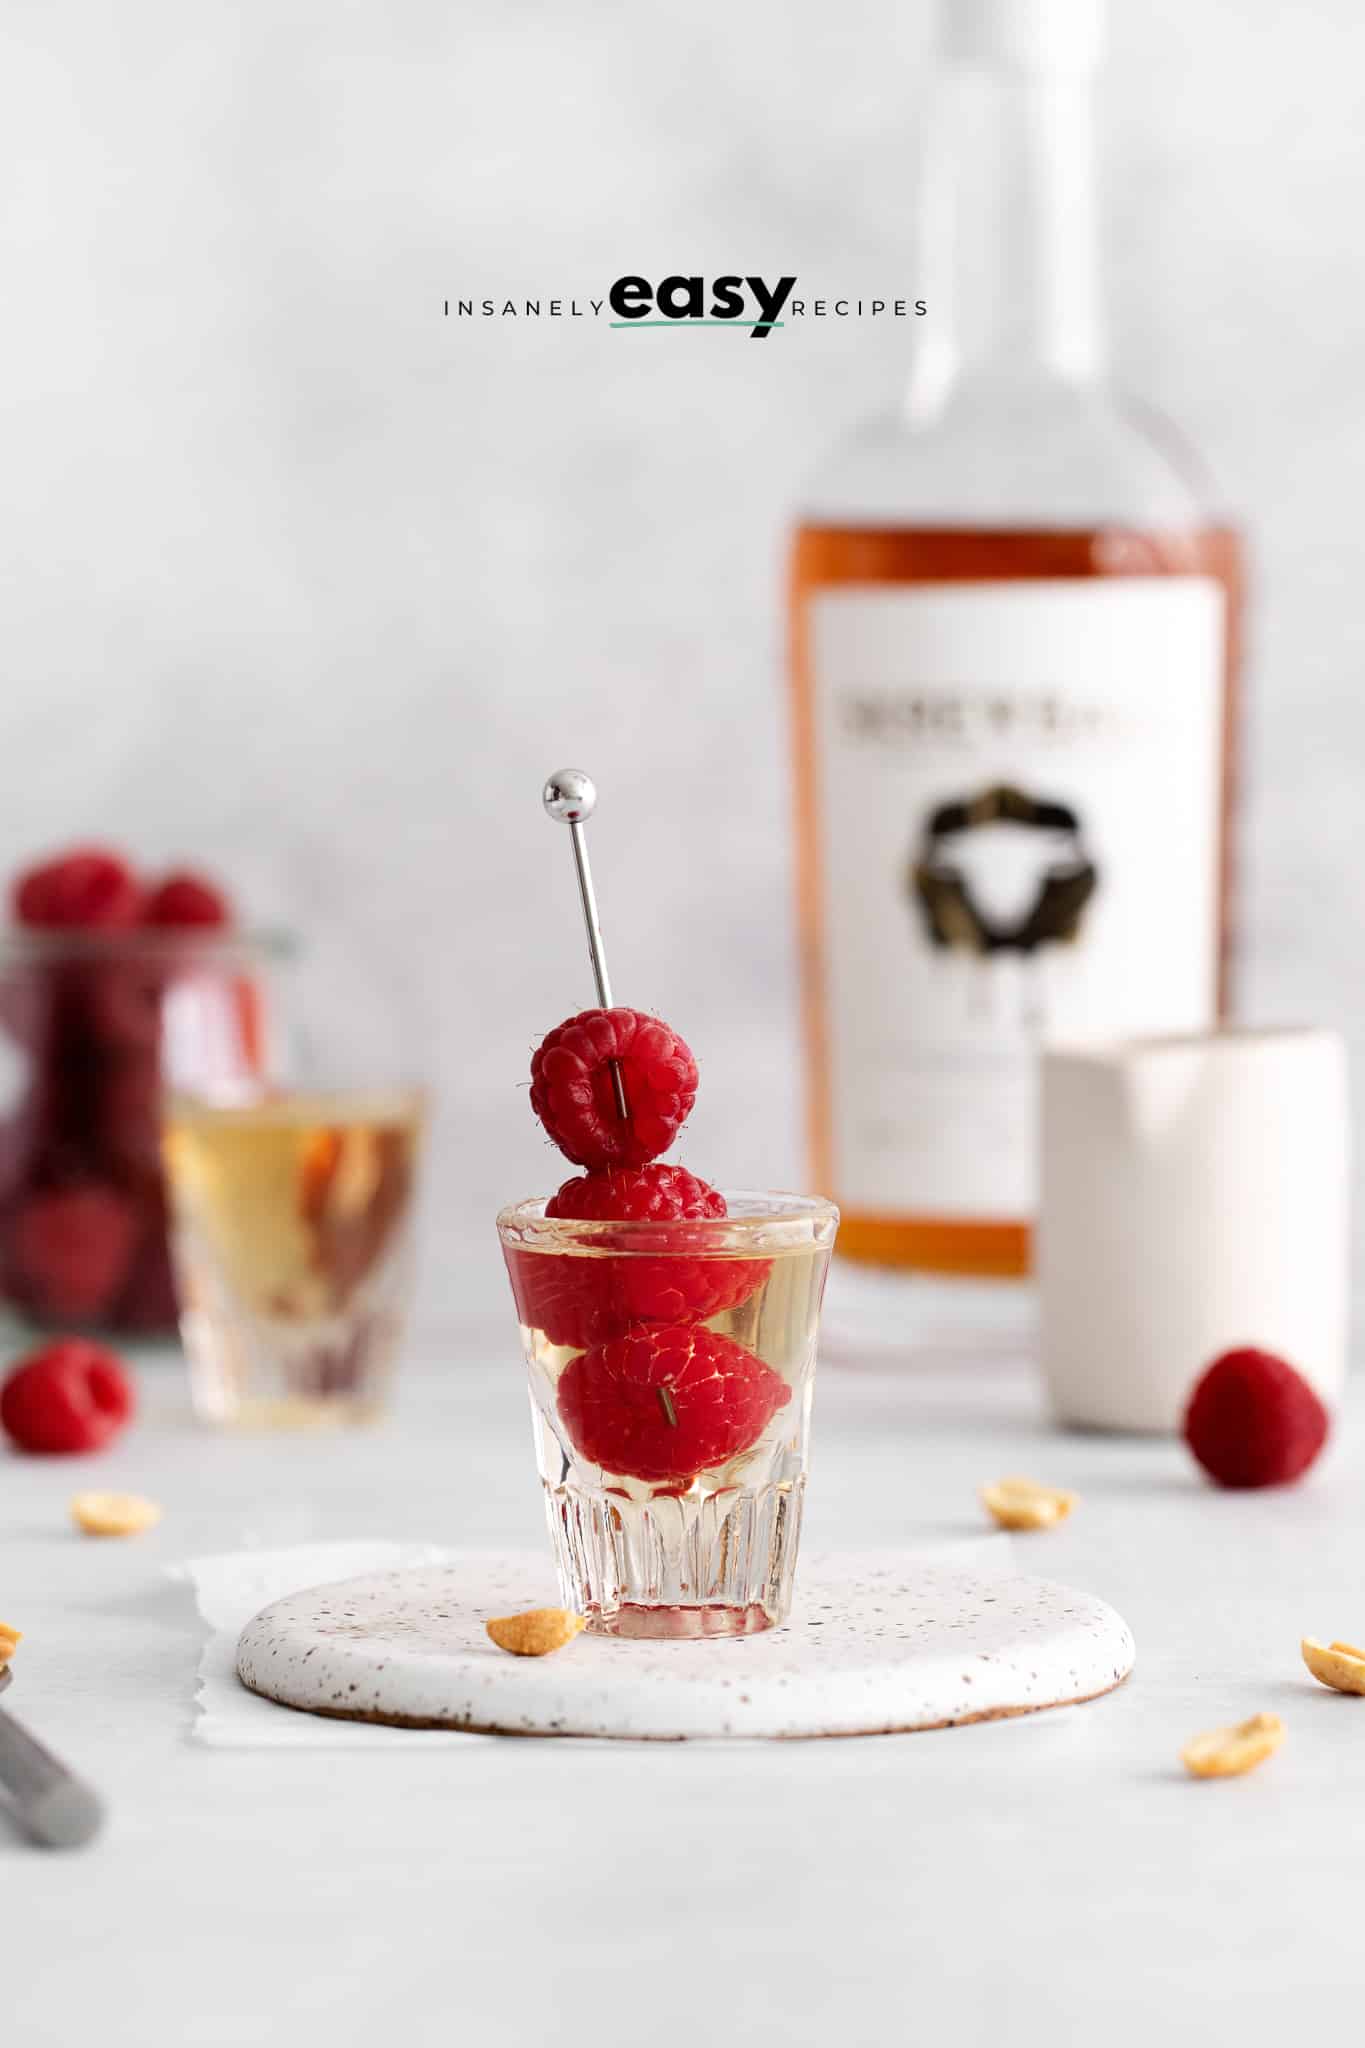 a Peanut butter and jelly shot with a skewer of fresh raspberries in it.